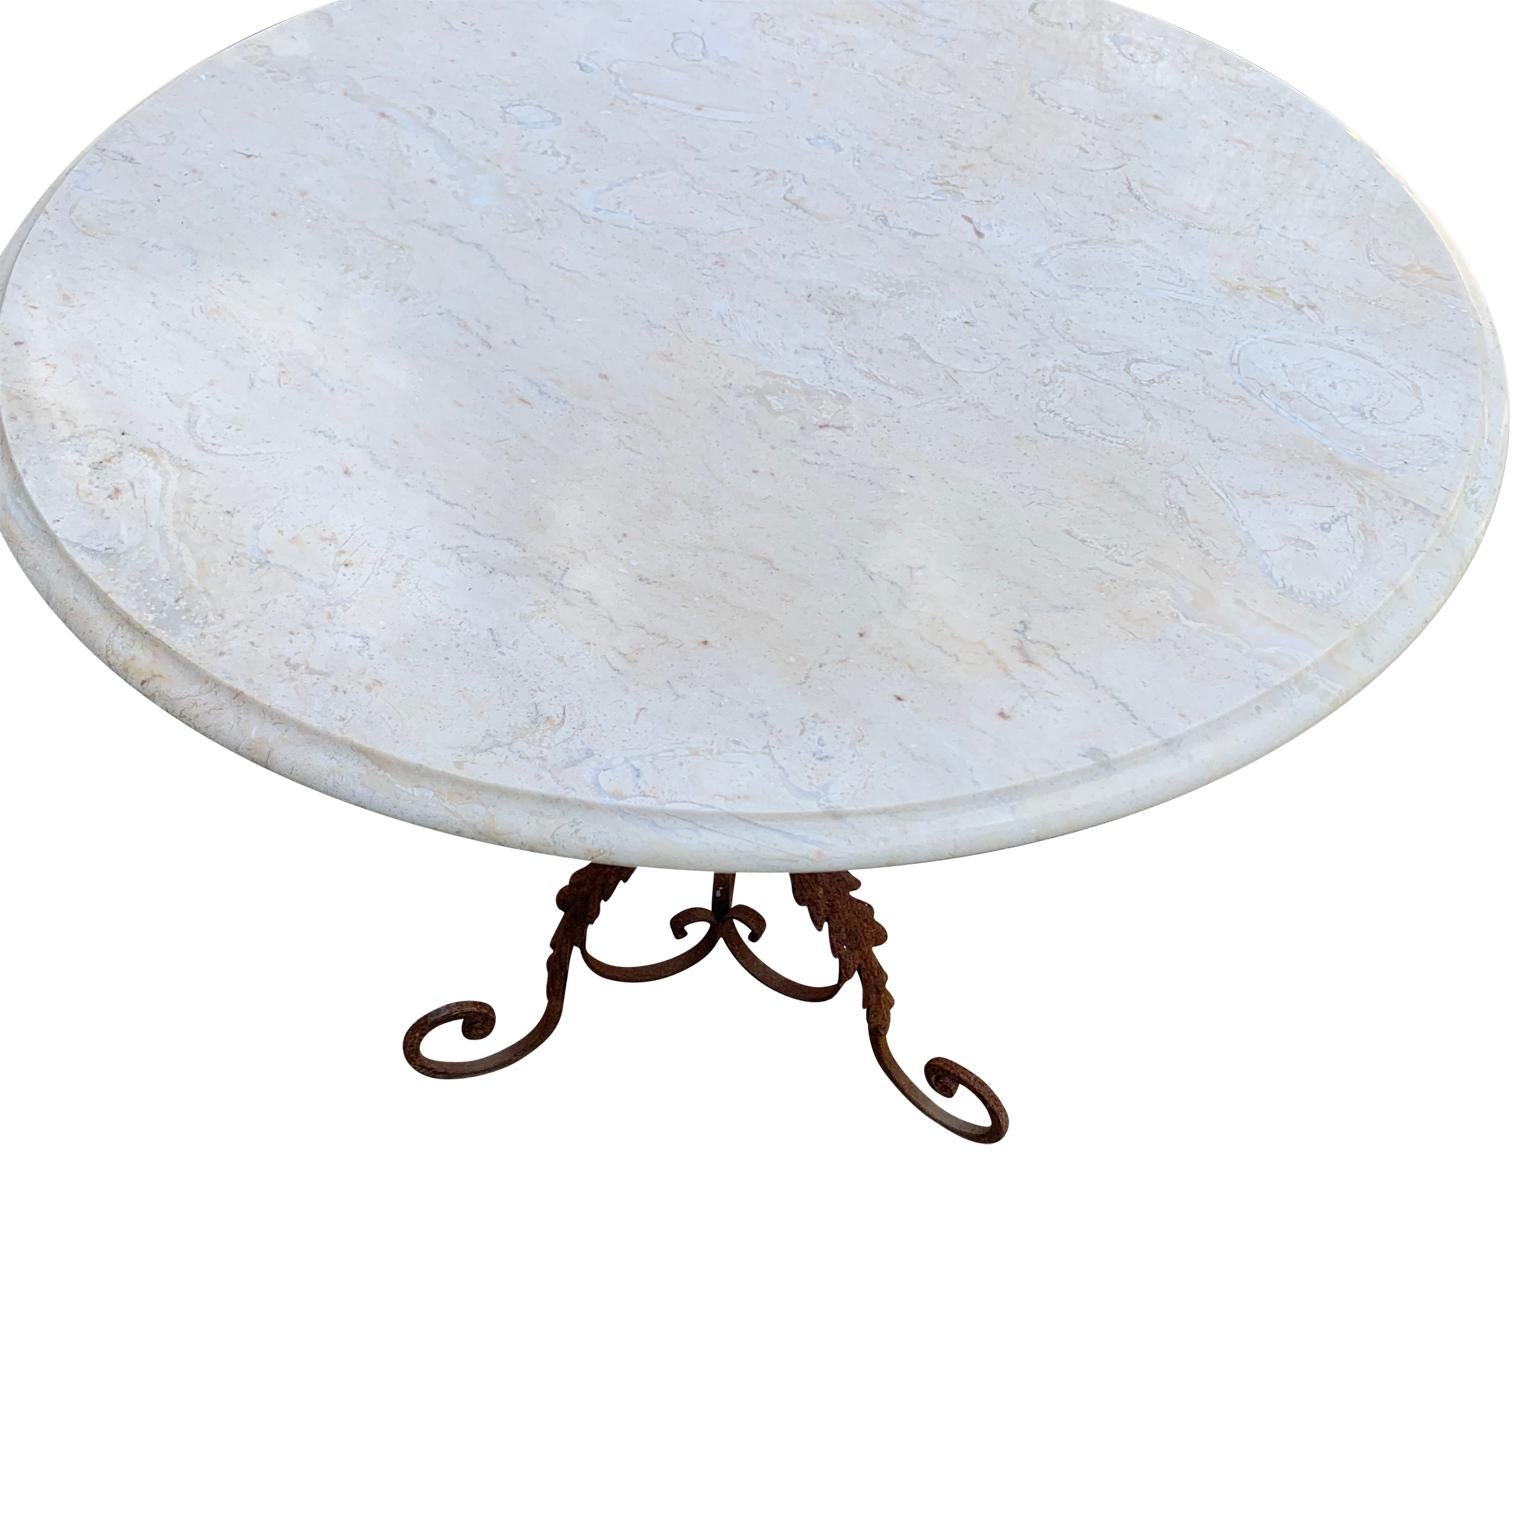 20th Century Pair of French Round Wrought Iron and Marble Garden Bistro Tables